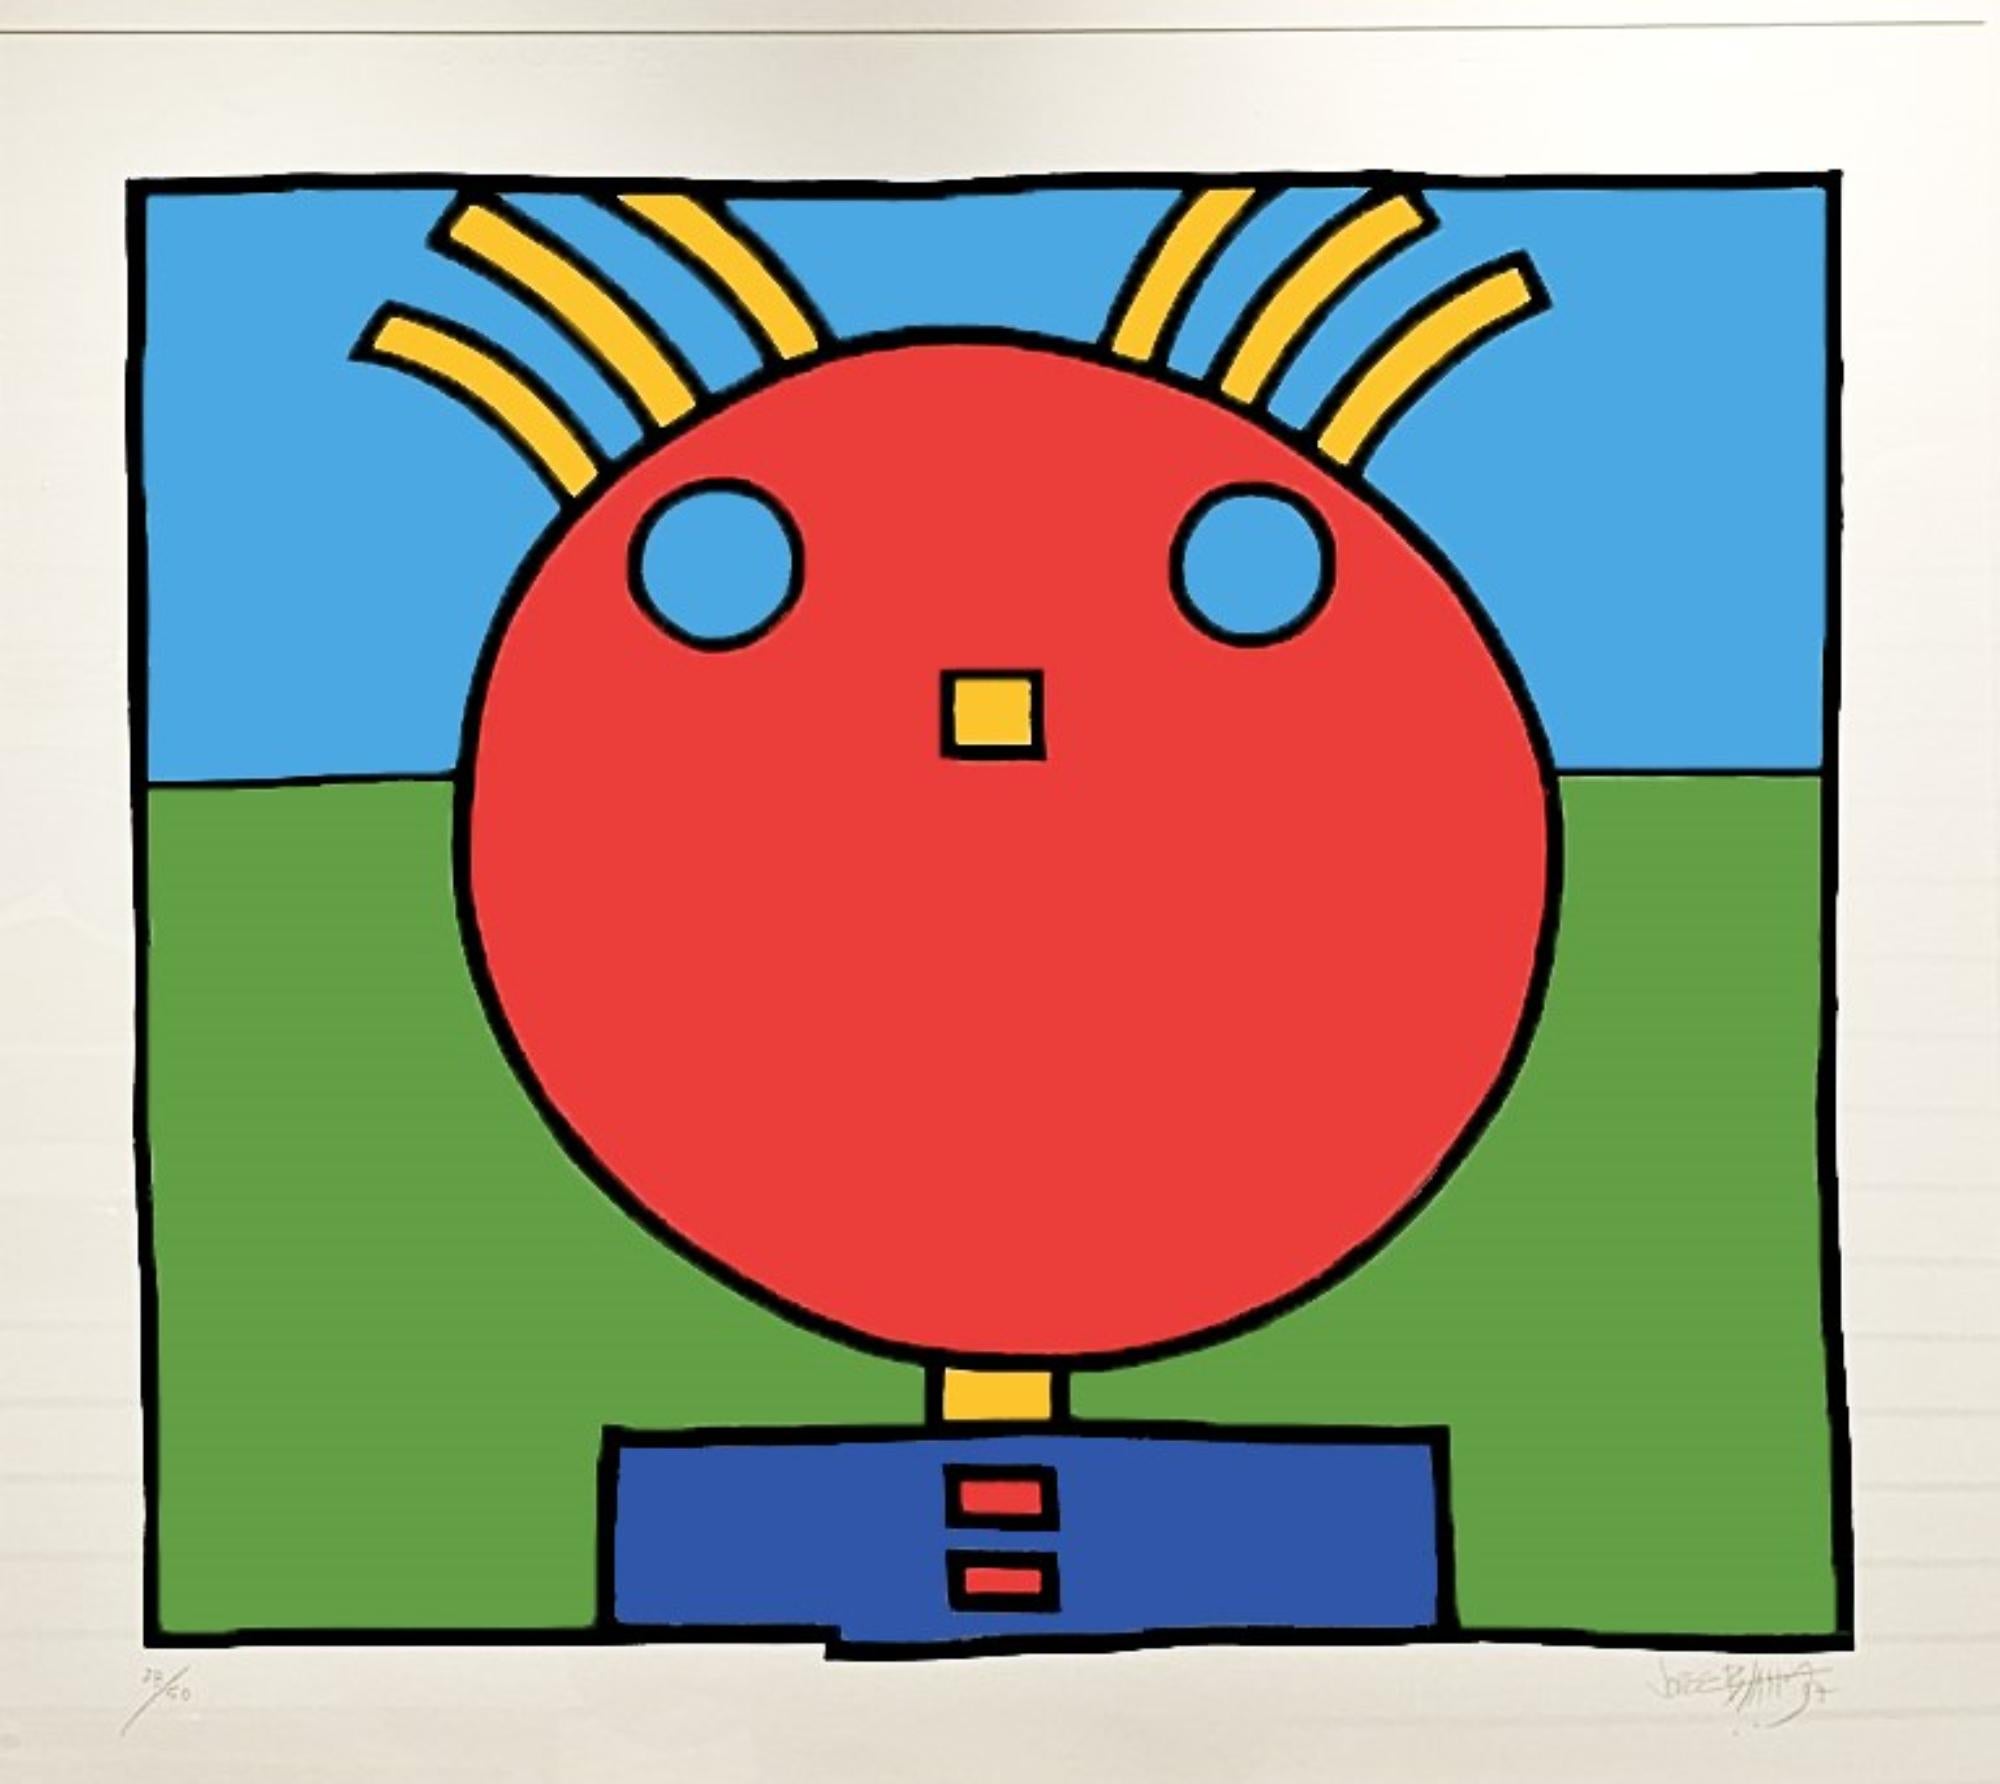 Jorge Blanco (b1945) American, Artist Proof. Depciting a red face with blue eyes, yellow hair, yellow nose, and a blue shirt with red buttons, and a blue and green background. Titled 